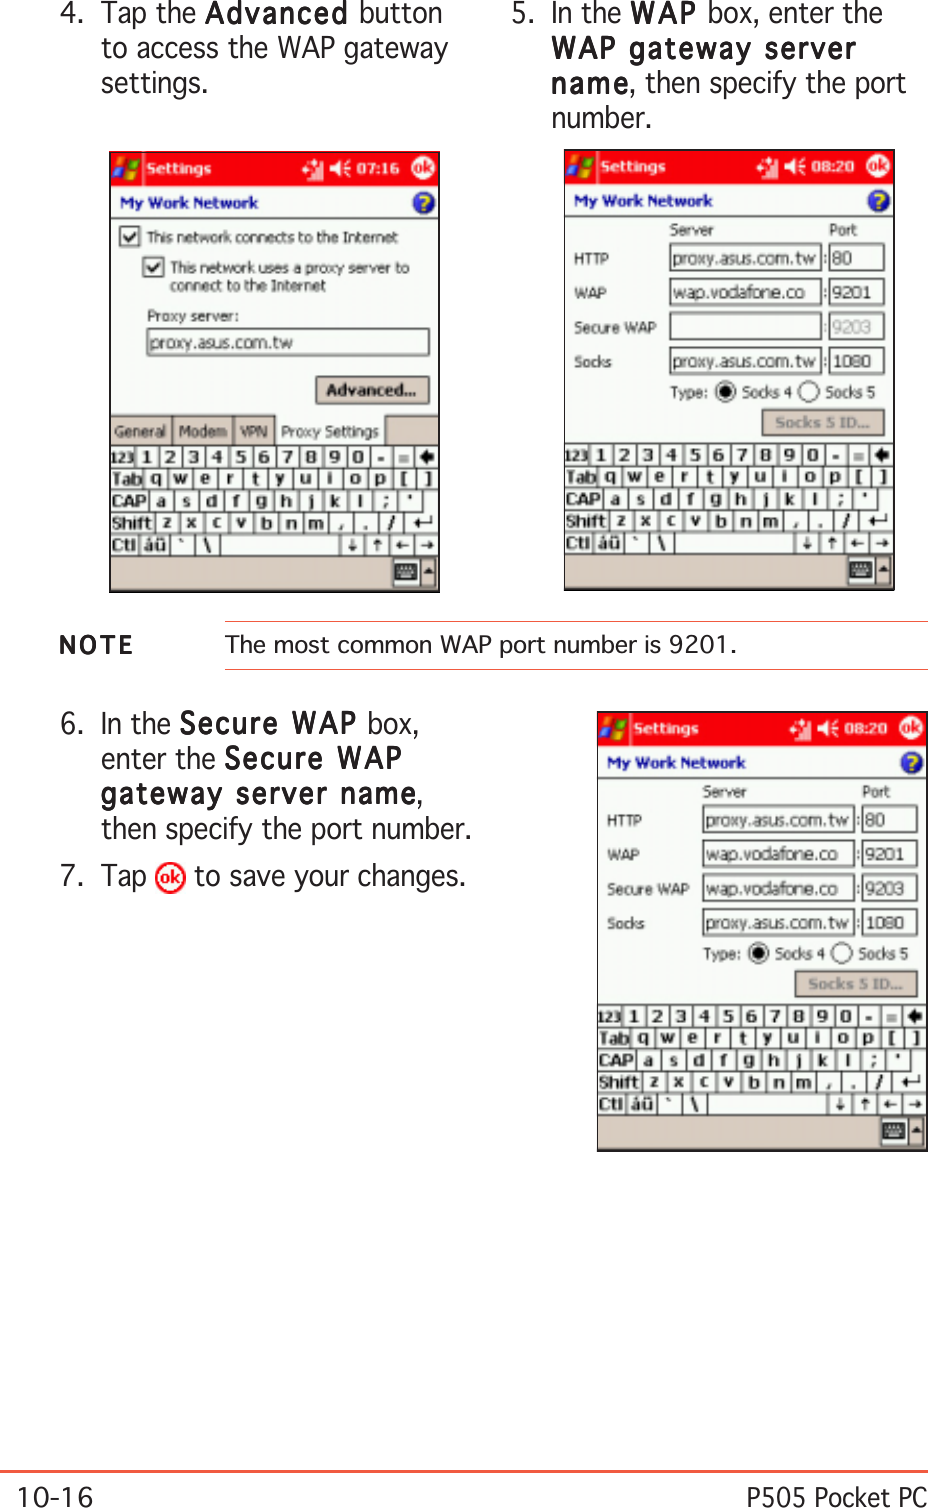 10-16P505 Pocket PC6. In the Secure WAP Secure WAP Secure WAP Secure WAP Secure WAP box,enter the Secure WAPSecure WAPSecure WAPSecure WAPSecure WAPgateway server namegateway server namegateway server namegateway server namegateway server name,then specify the port number.7. Tap   to save your changes.4. Tap the AdvancedAdvancedAdvancedAdvancedAdvanced buttonto access the WAP gatewaysettings.5. In the WAPWAPWAPWAPW AP box, enter theWAP gateway serverWAP gateway serverWAP gateway serverWAP gateway serverWAP gateway servernamenamenamenamena m e, then specify the portnumber.NOTENOTENOTENOTEN O T E The most common WAP port number is 9201.